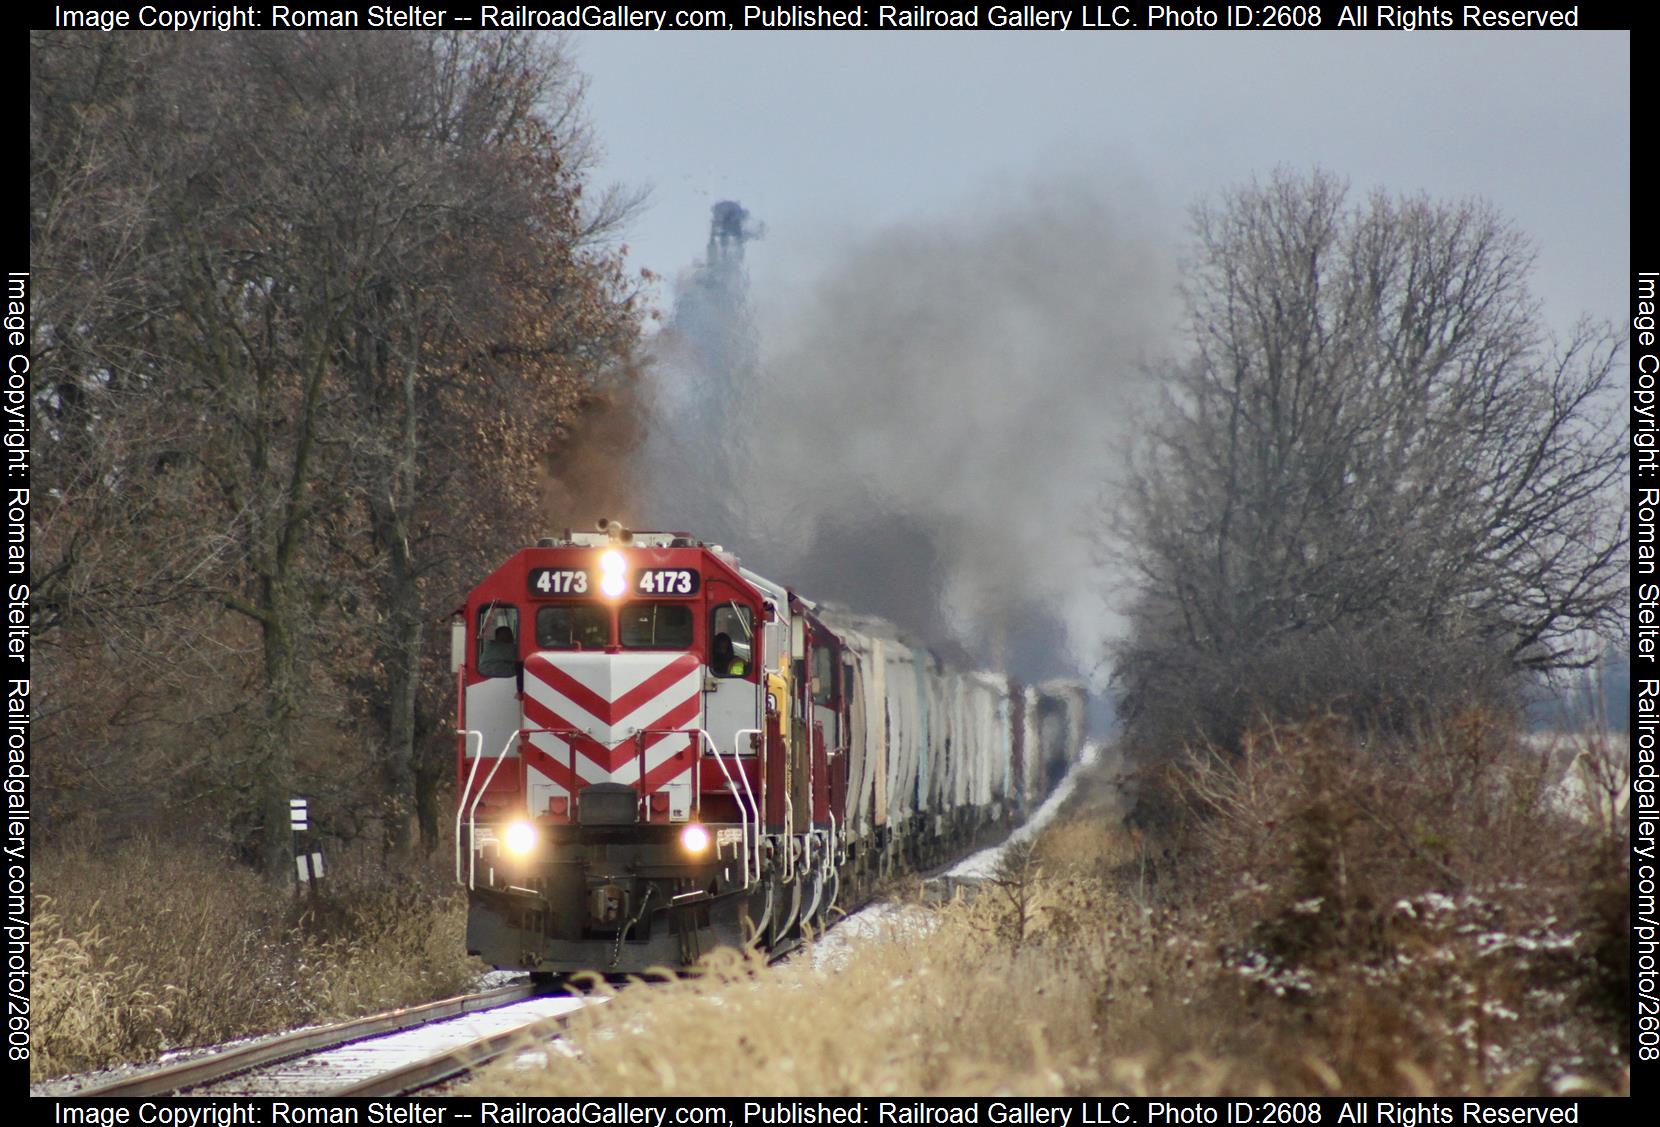 WAMX 4173 is a class SD40-2 and  is pictured in Lima Center, Wi, Wisconsin, United States.  This was taken along the Waukesha Subdivision on the Wisconsin and Southern Railroad. Photo Copyright: Roman Stelter uploaded to Railroad Gallery on 12/08/2023. This photograph of WAMX 4173 was taken on Saturday, November 25, 2023. All Rights Reserved. 